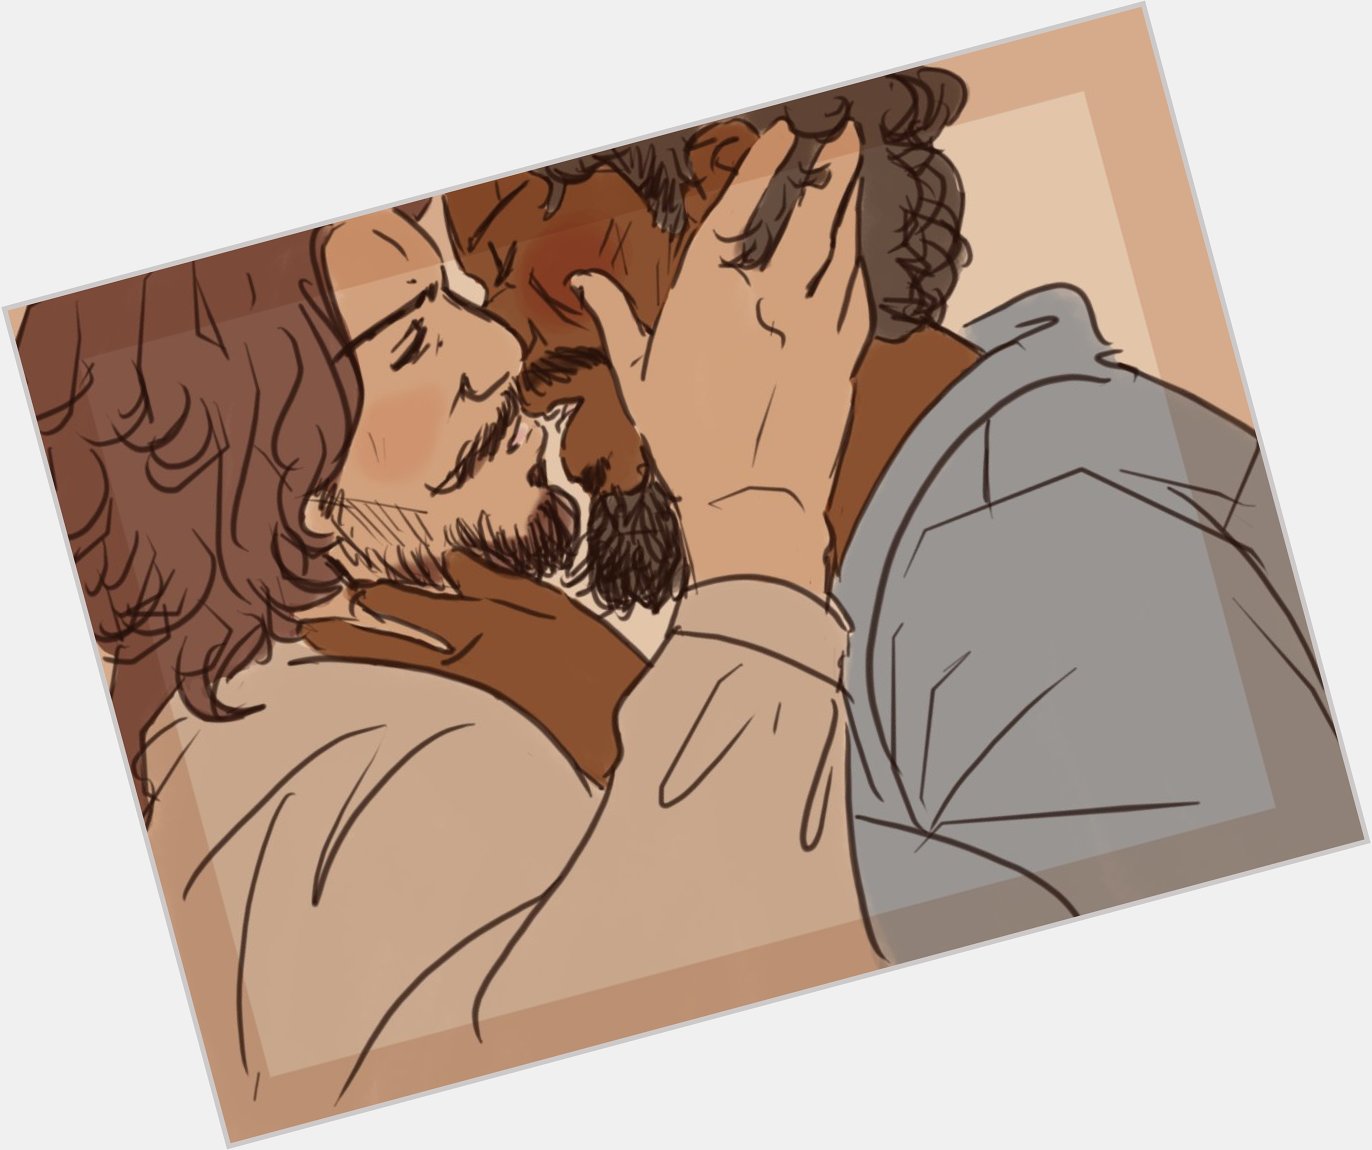 Happy birthday santiago cabrera & henry cavill, here are my fave charas of yours kissing other pretty people  